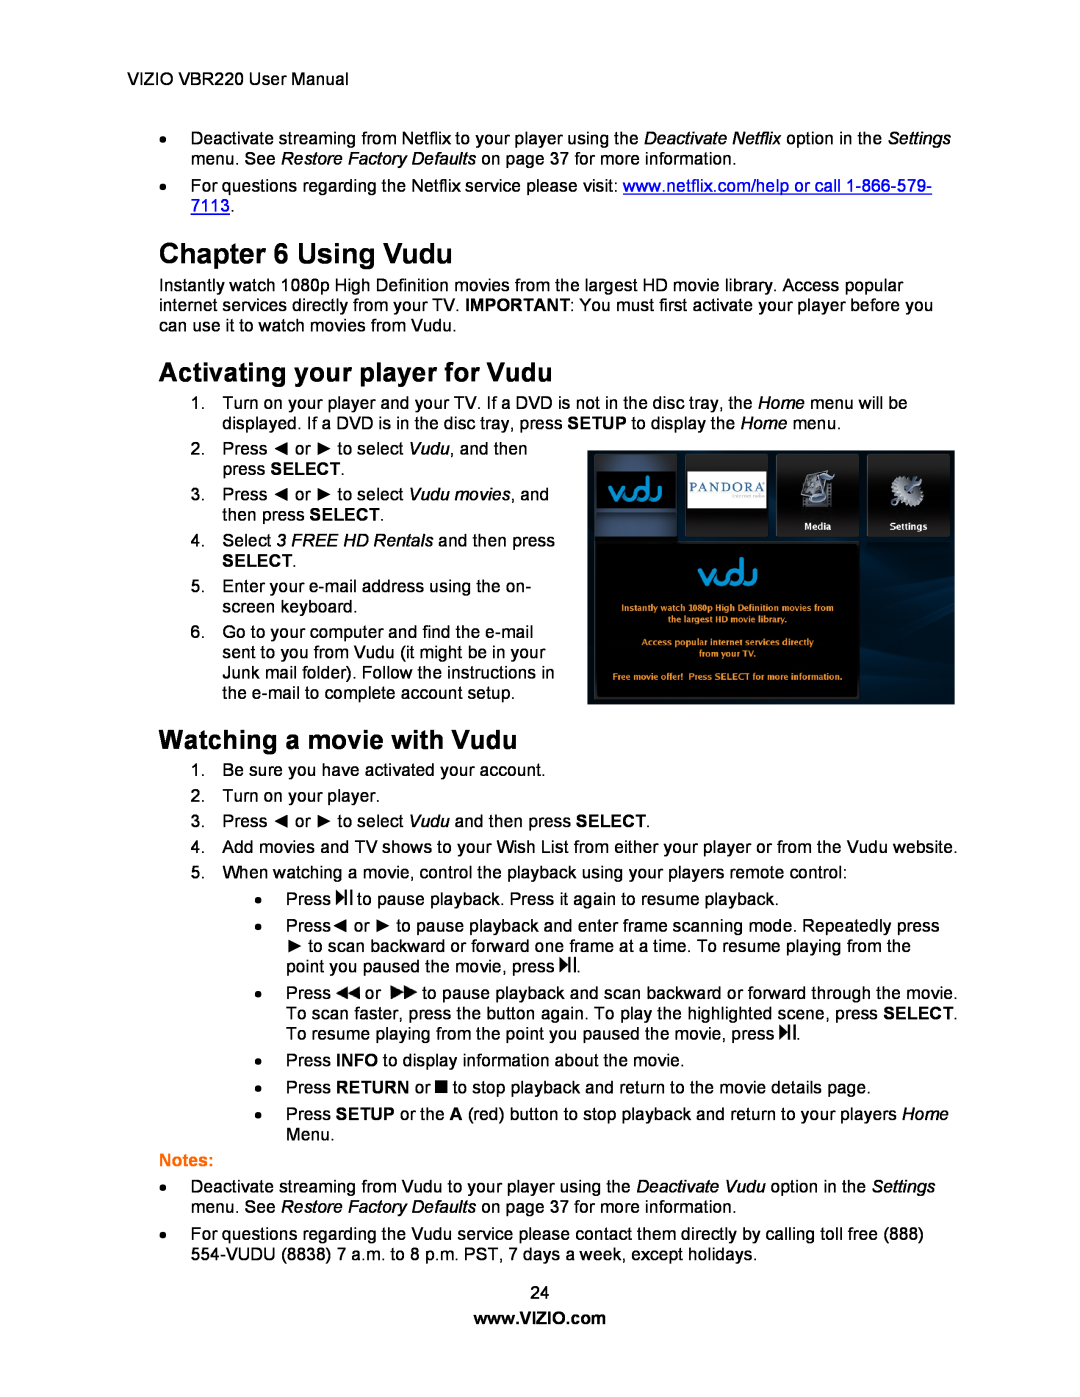 Panasonic VBR220 user manual Using Vudu, Activating your player for Vudu, Watching a movie with Vudu, Select 